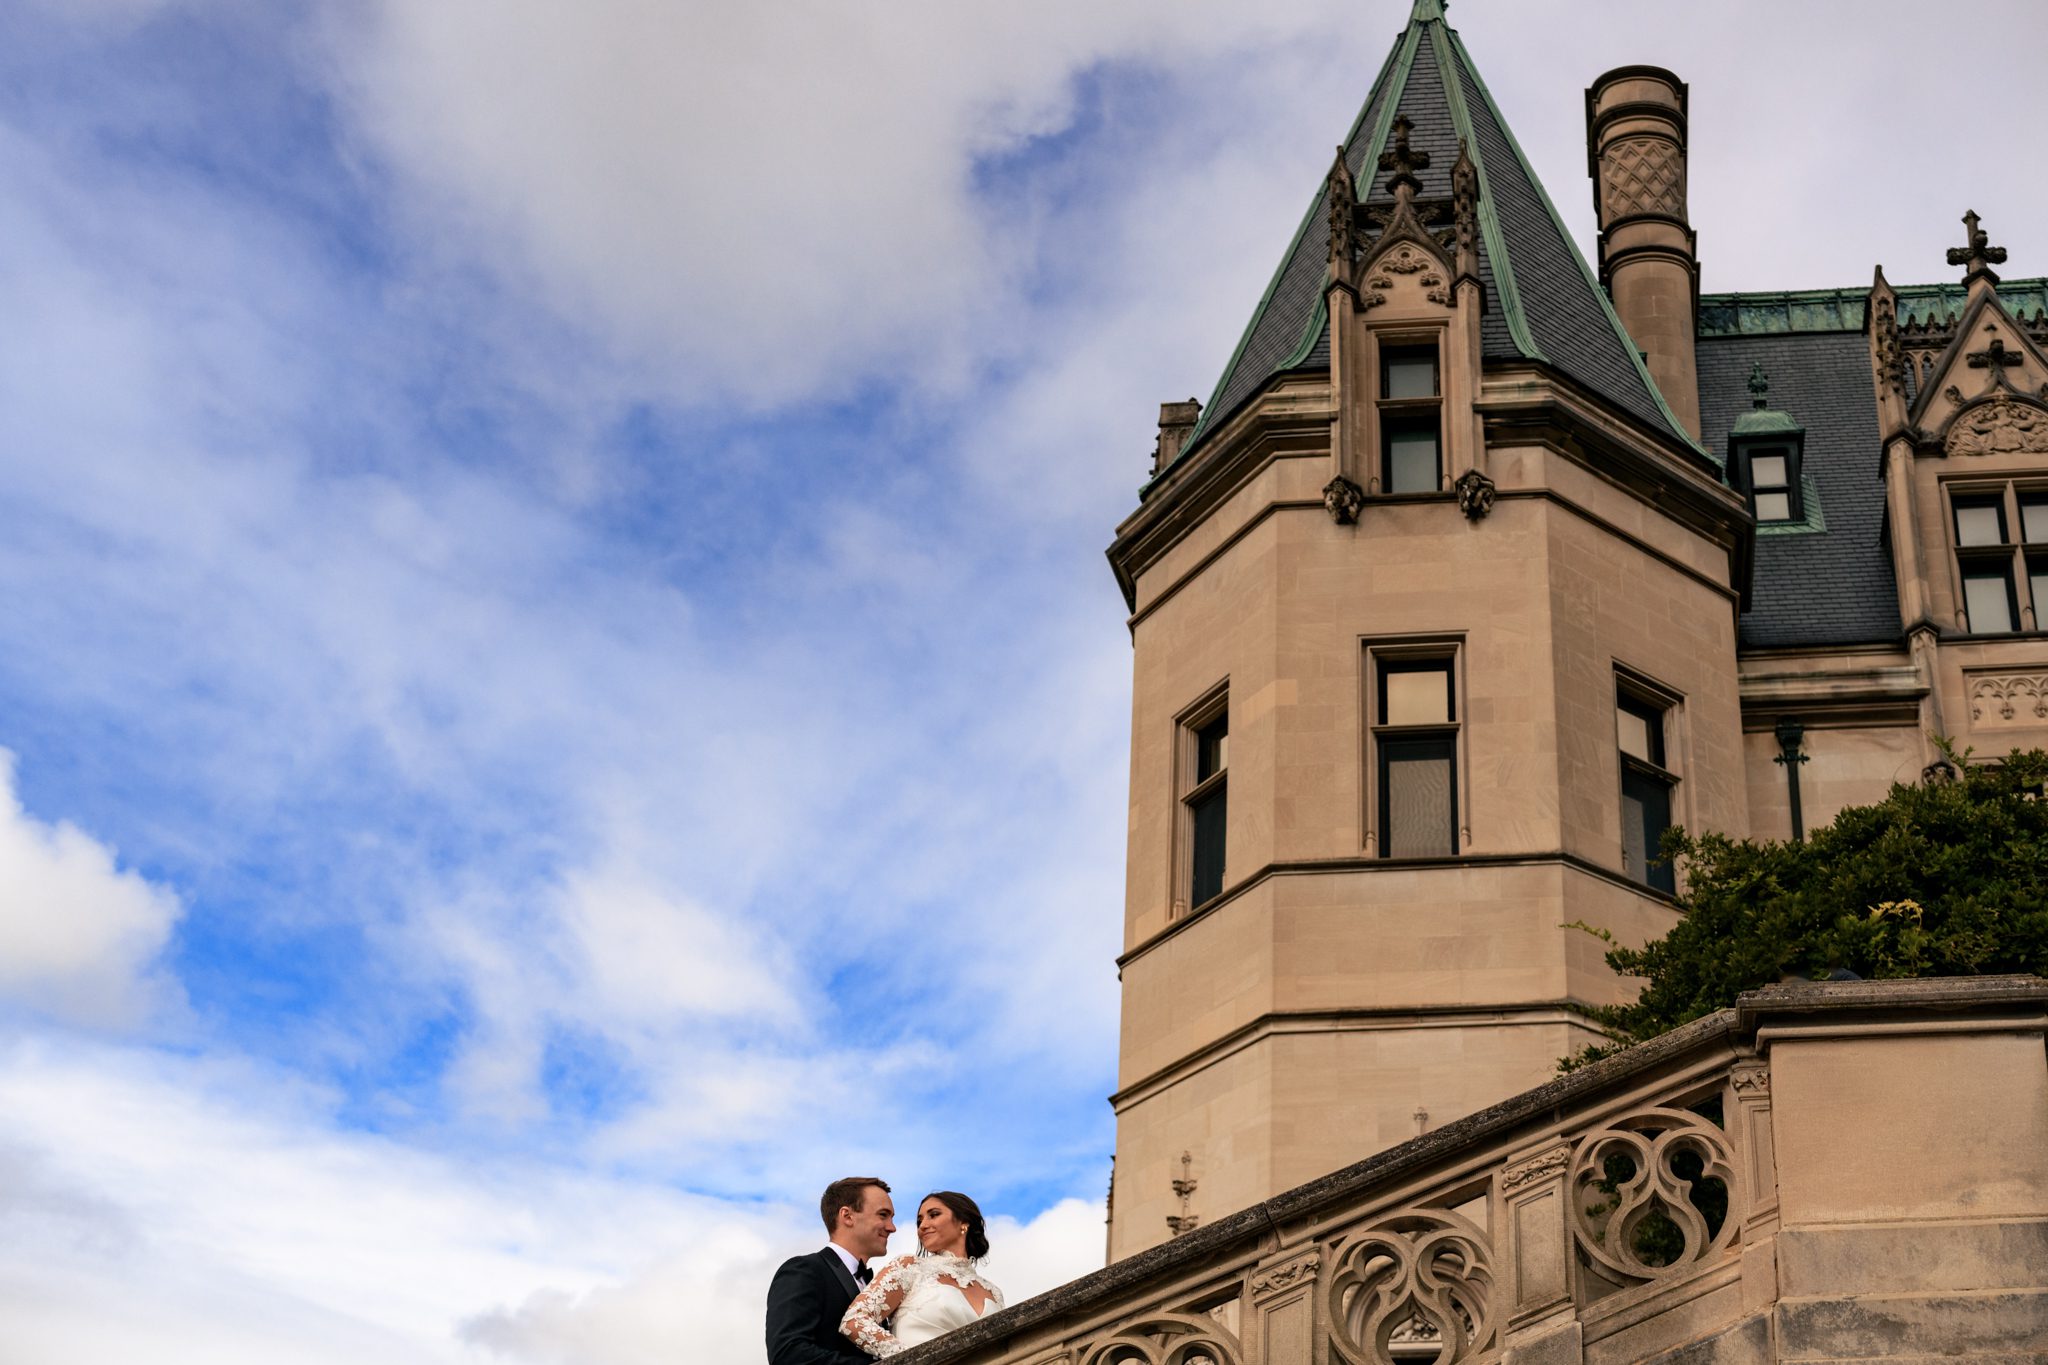 Bride and groom in elegant attire, standing on South Terrace steps at Biltmore Estate, surrounded by lush scenery